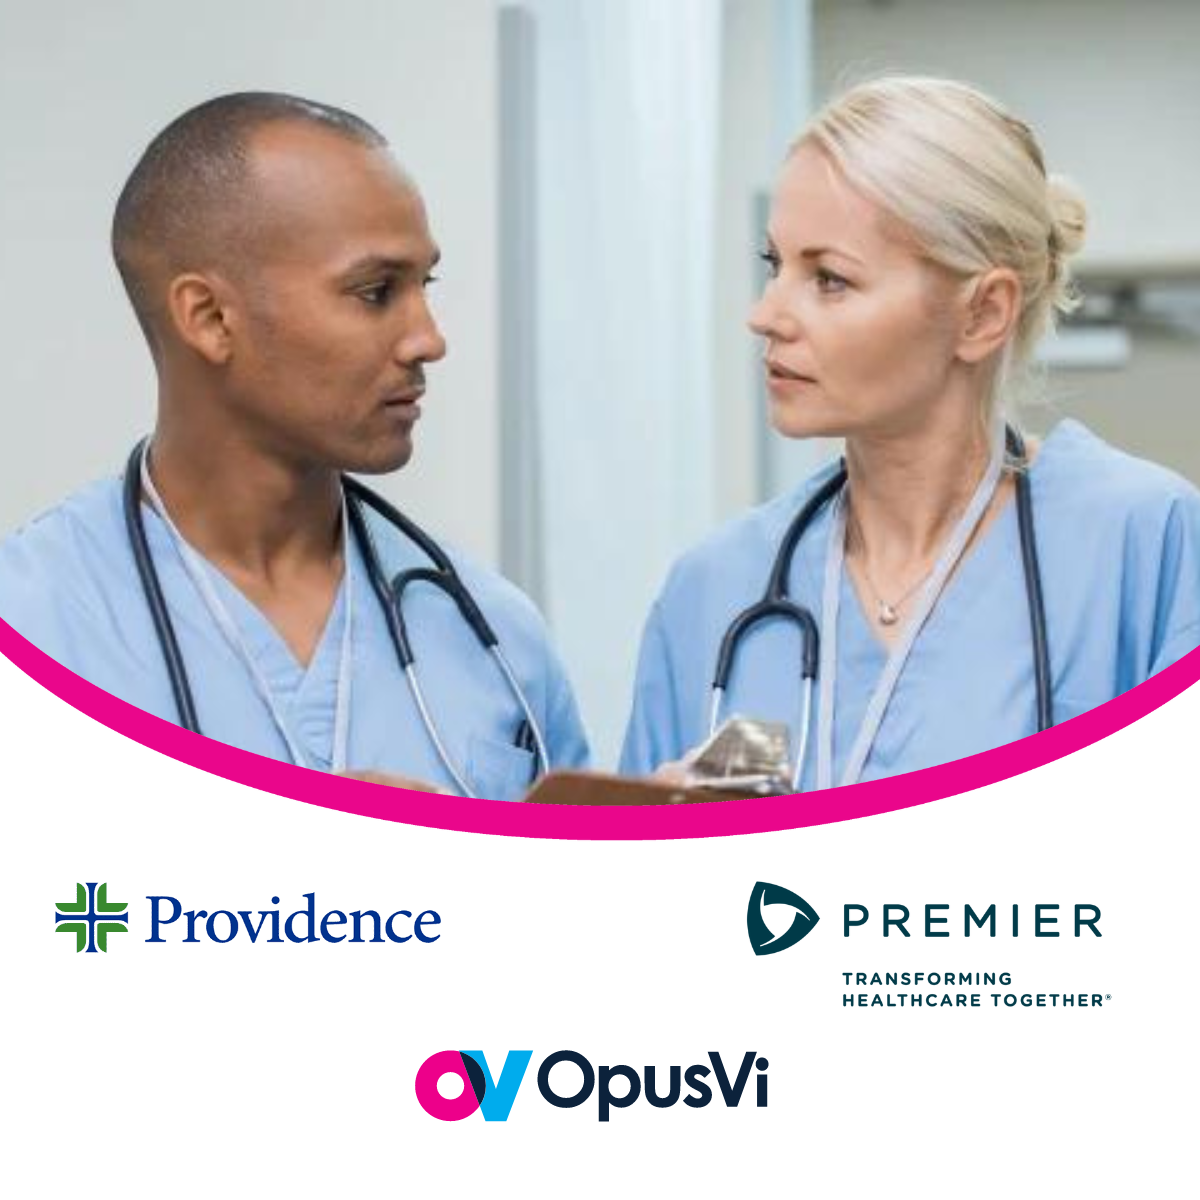 Providence and Premier, Inc. join CommonSpirit to support the development of the healthcare workforce